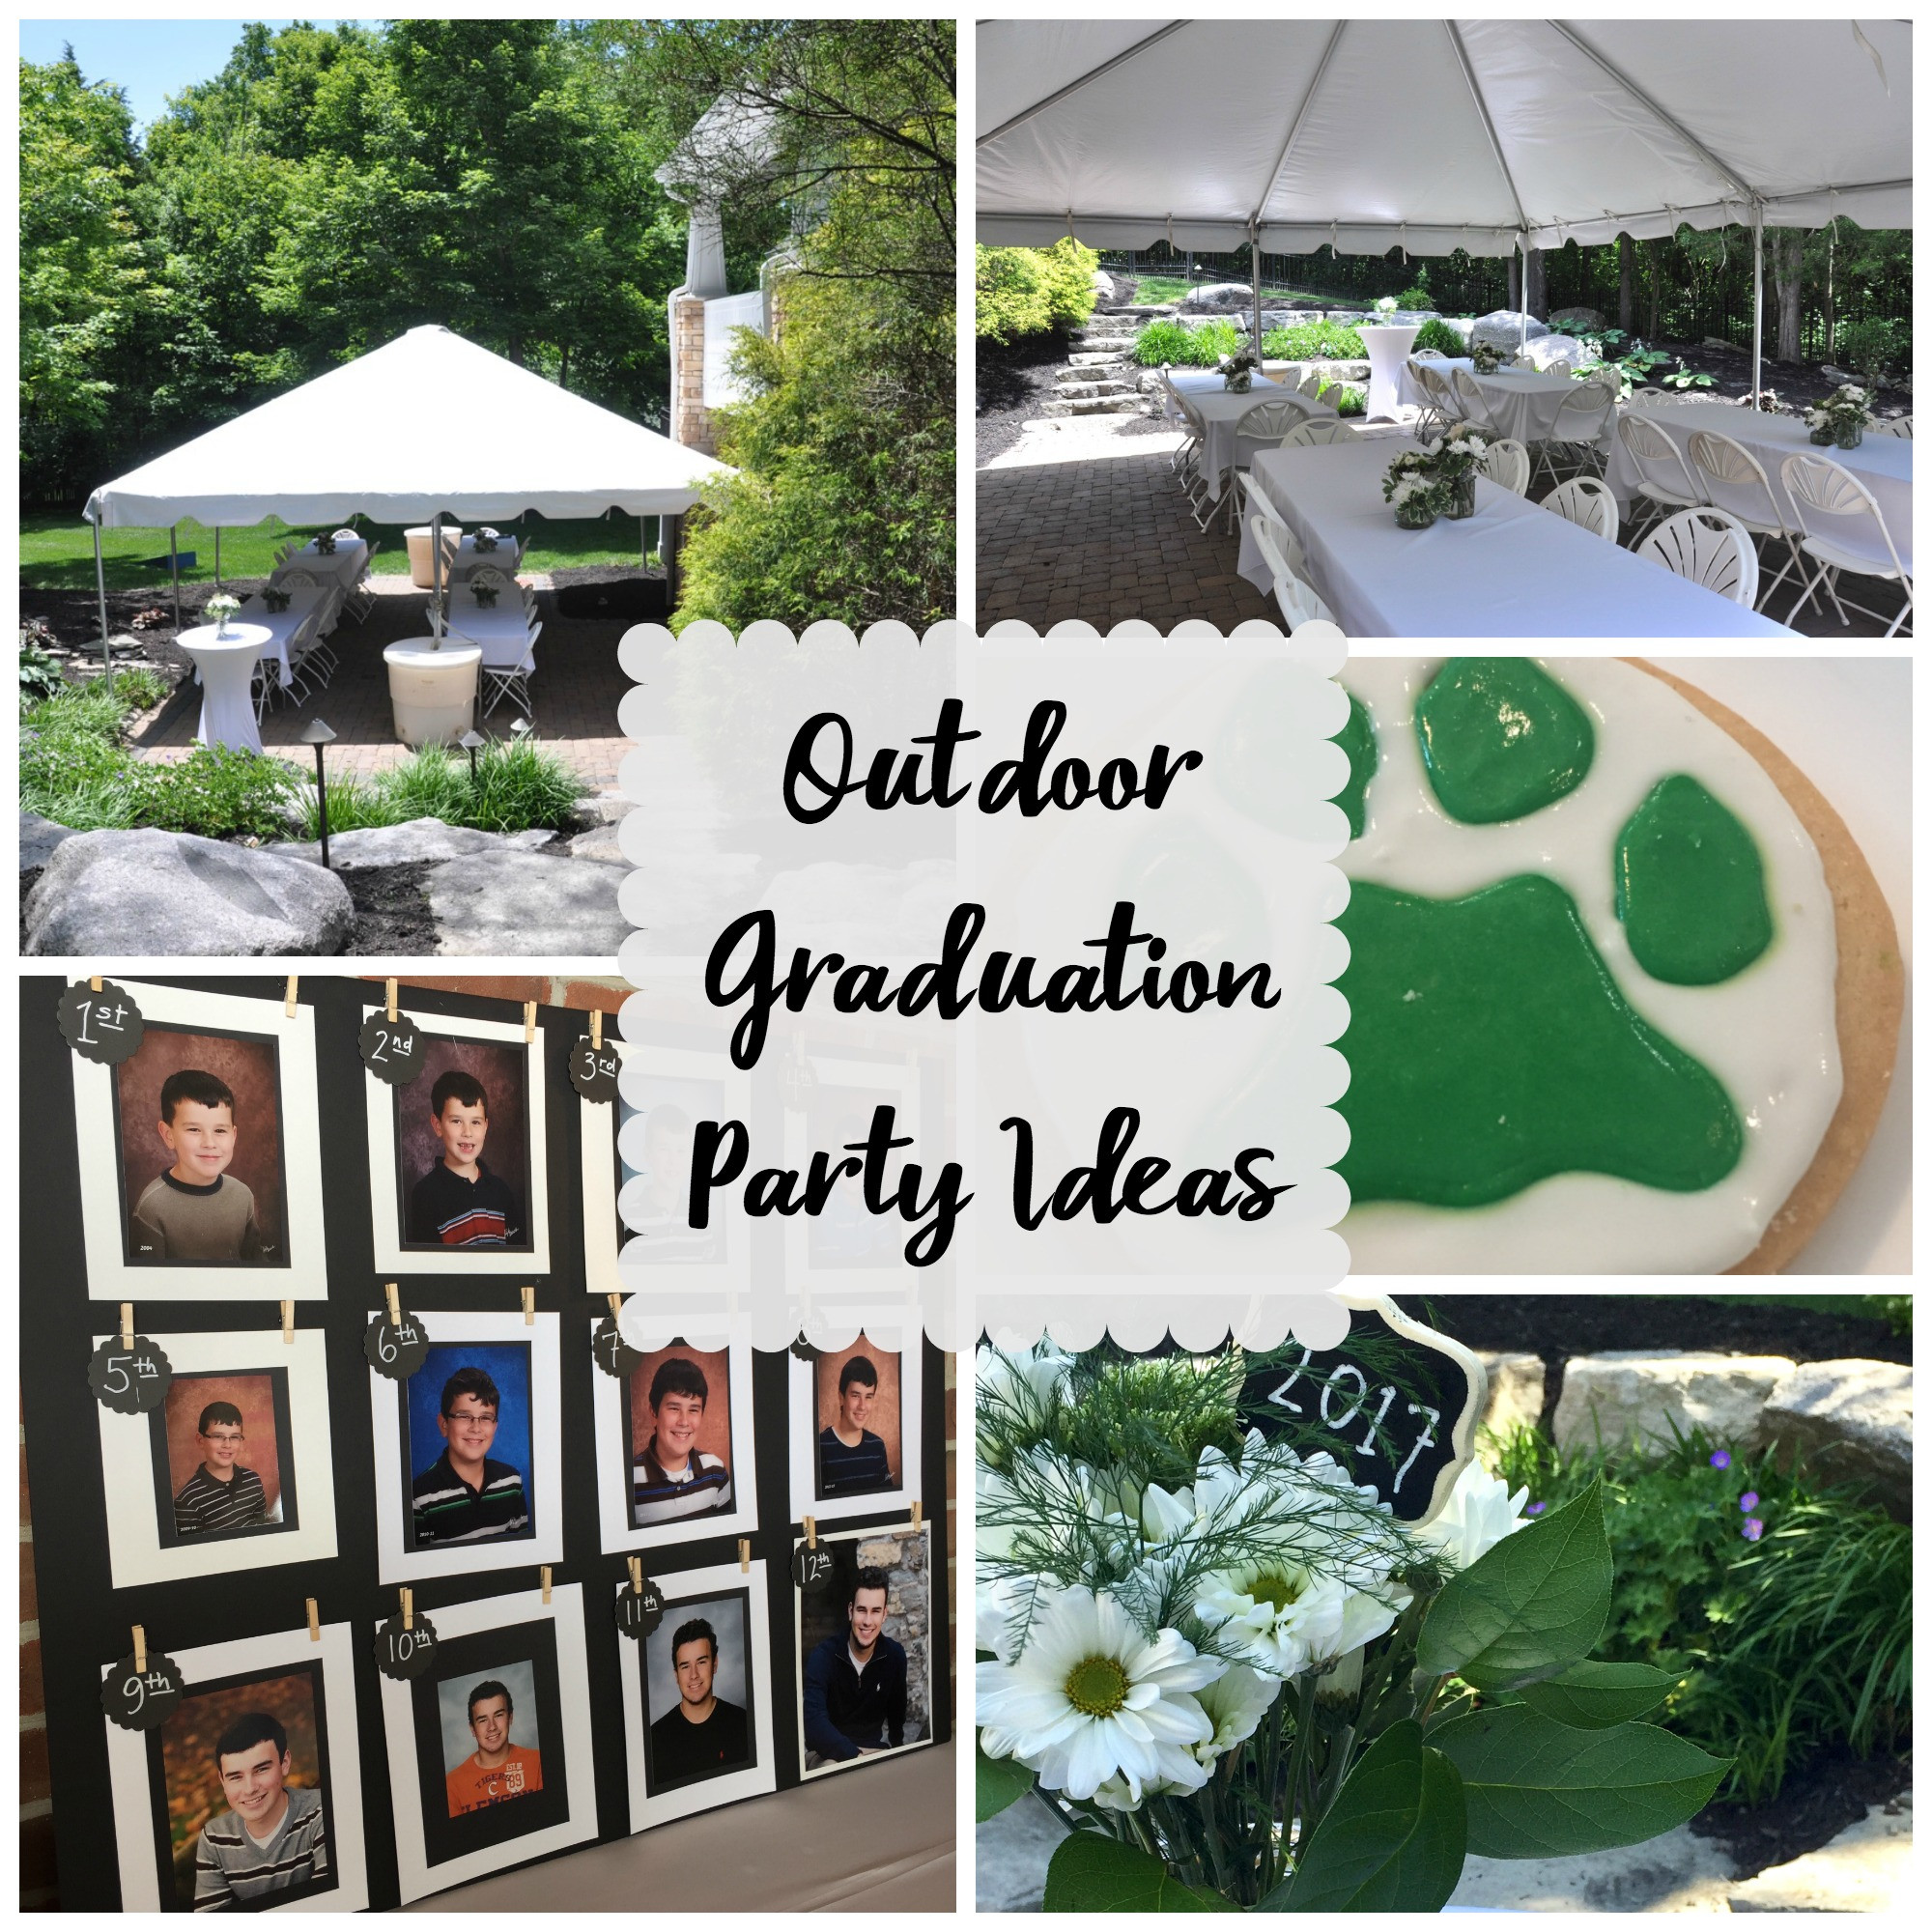 Backyard Graduation Party Decorations
 Outdoor Graduation Party Evolution of Style